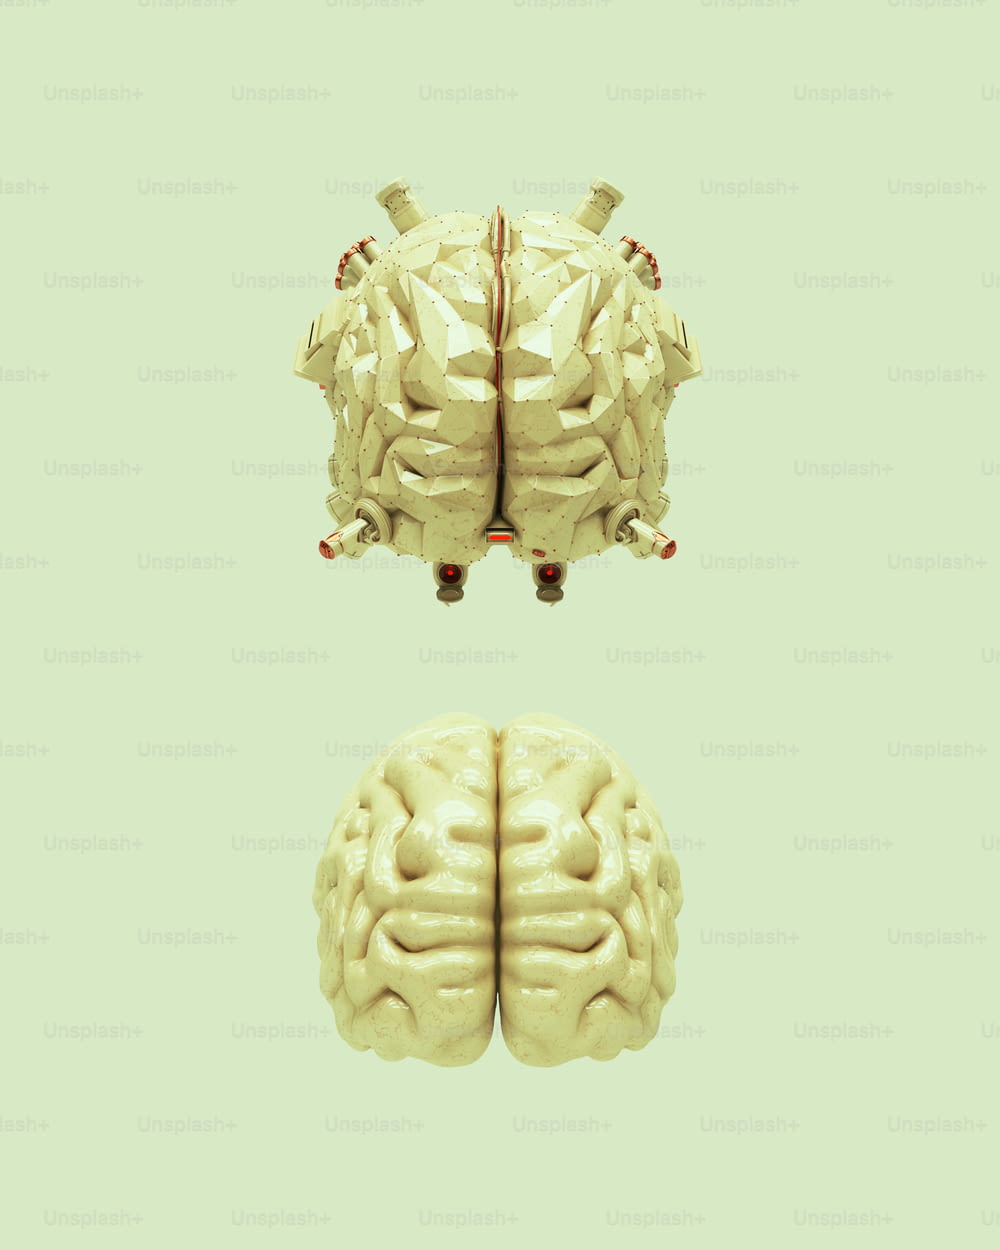 two images of the same human brain